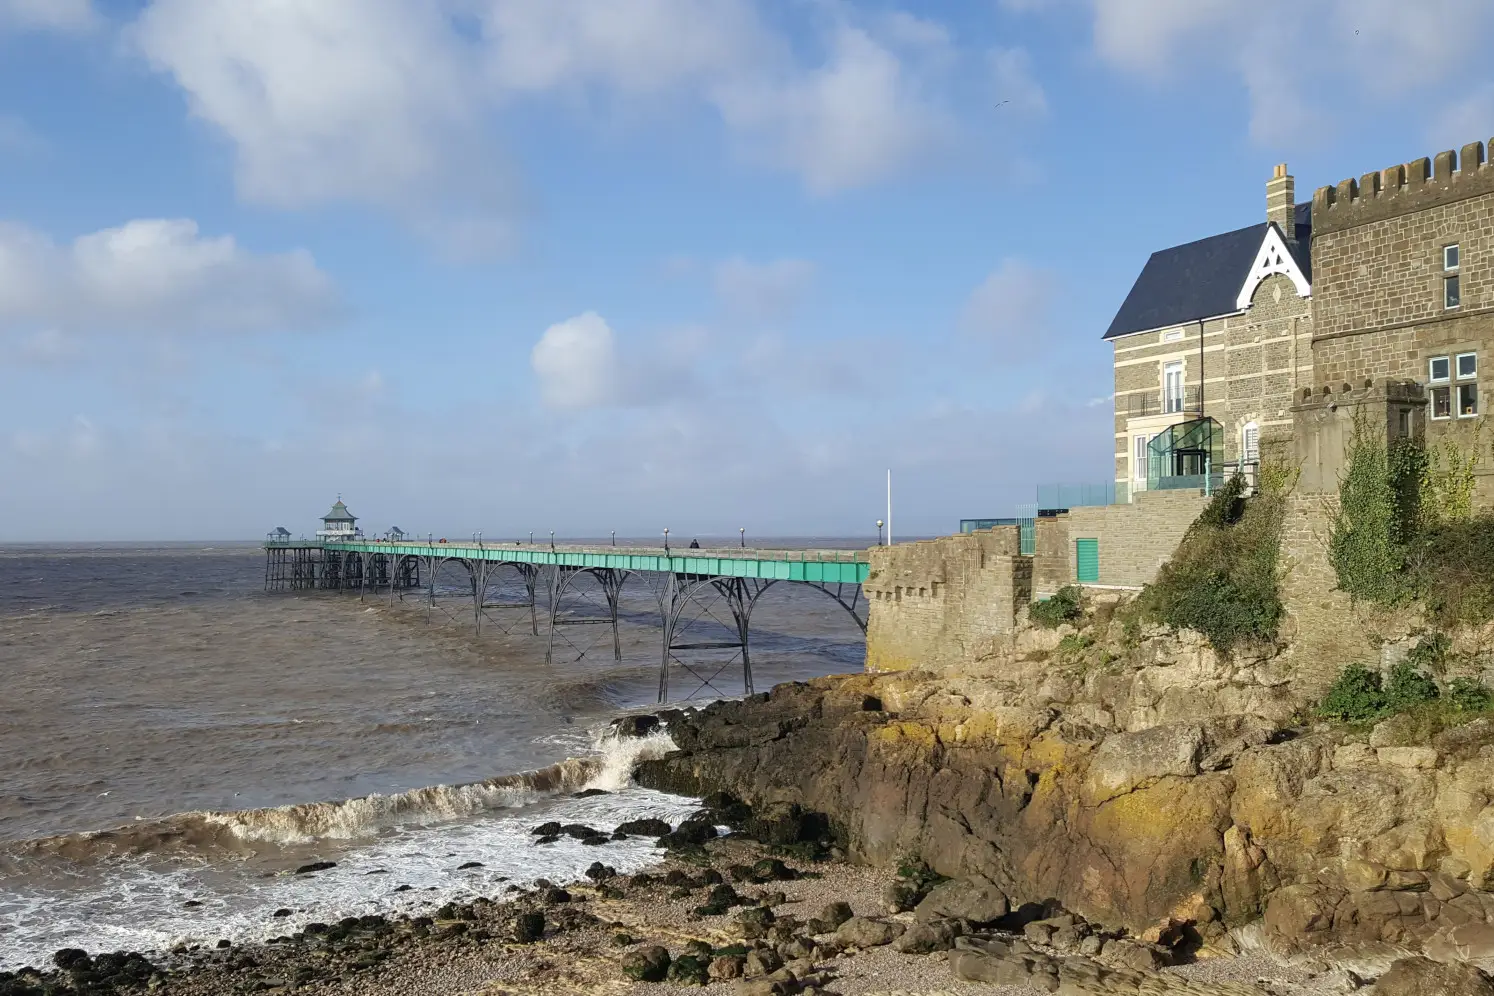 View of Clevedon Pier from Clevedon Promenade